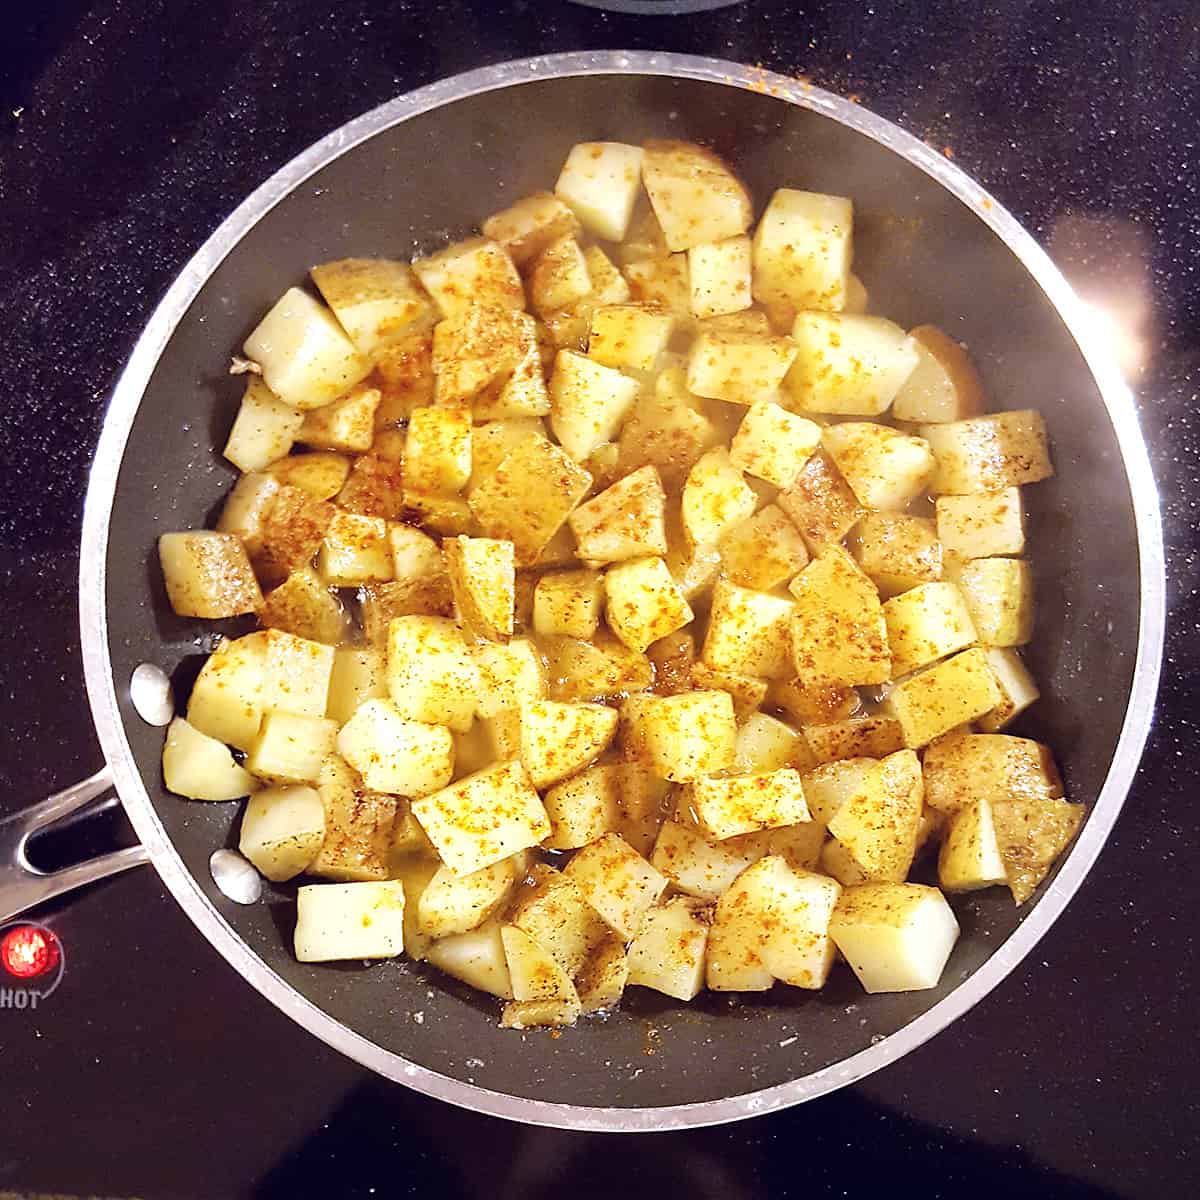 Potatoes cooking in a skillet.